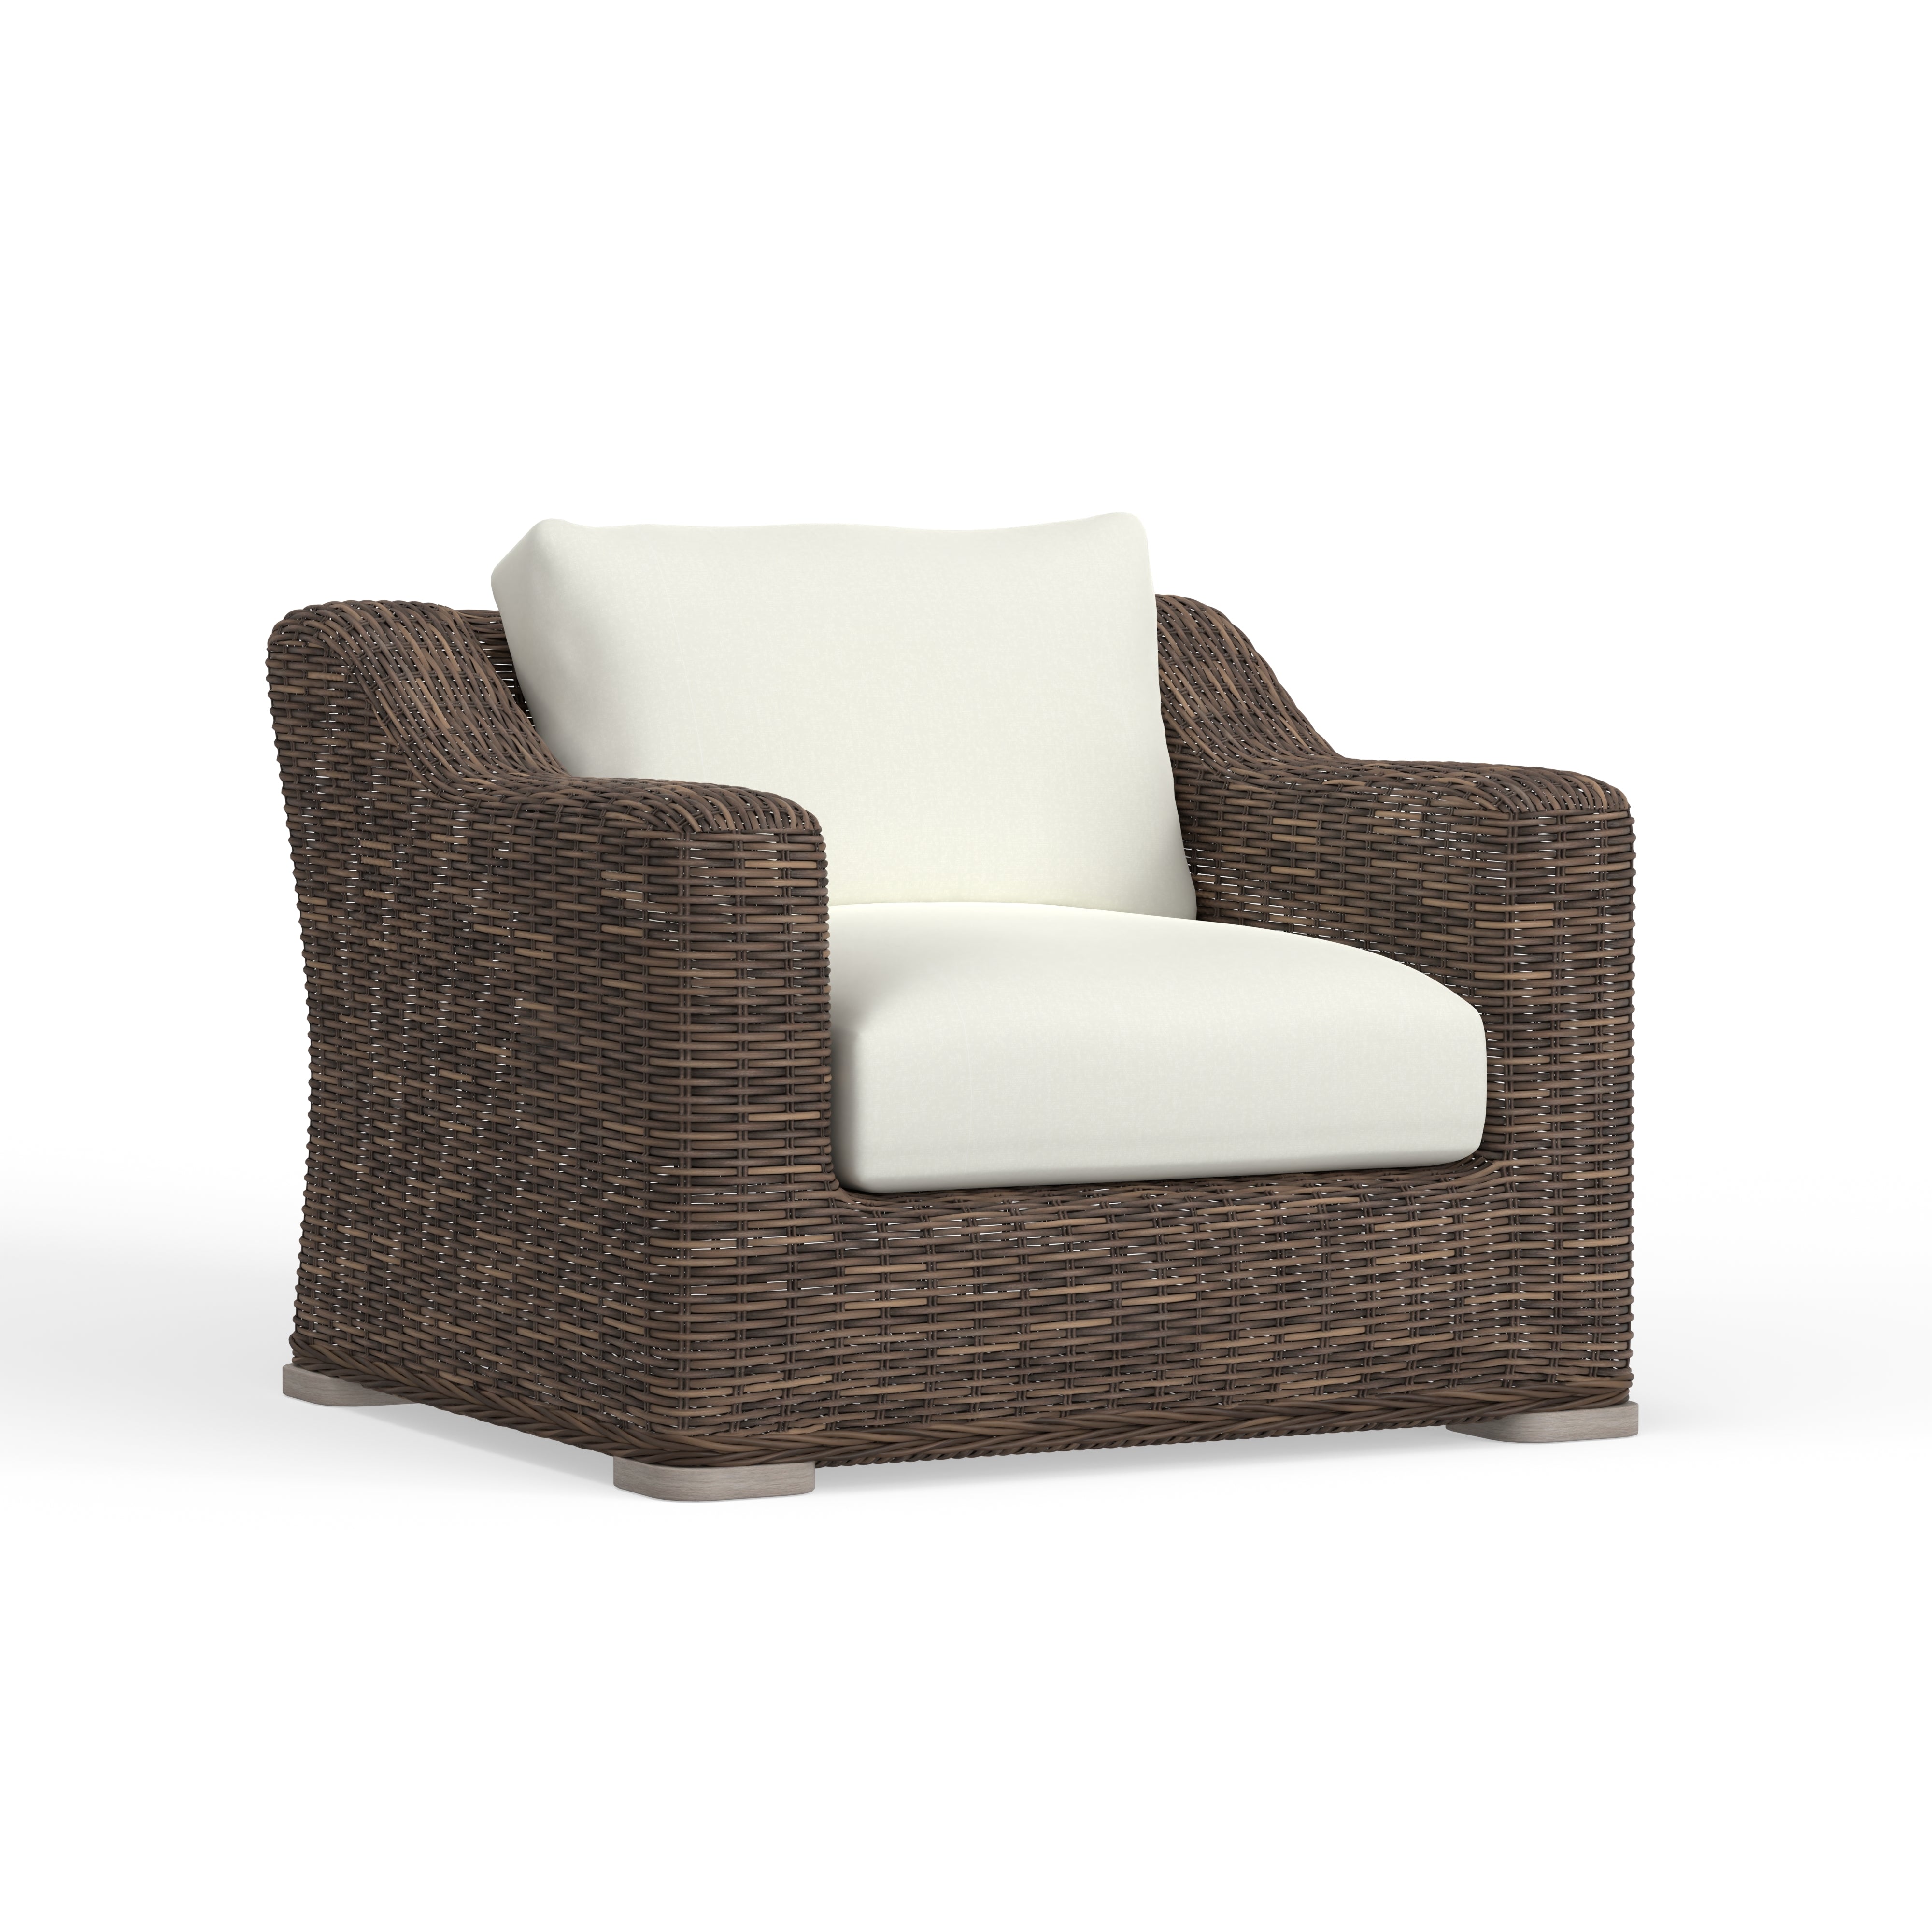 Best Quality Outdoor Wicker Chair